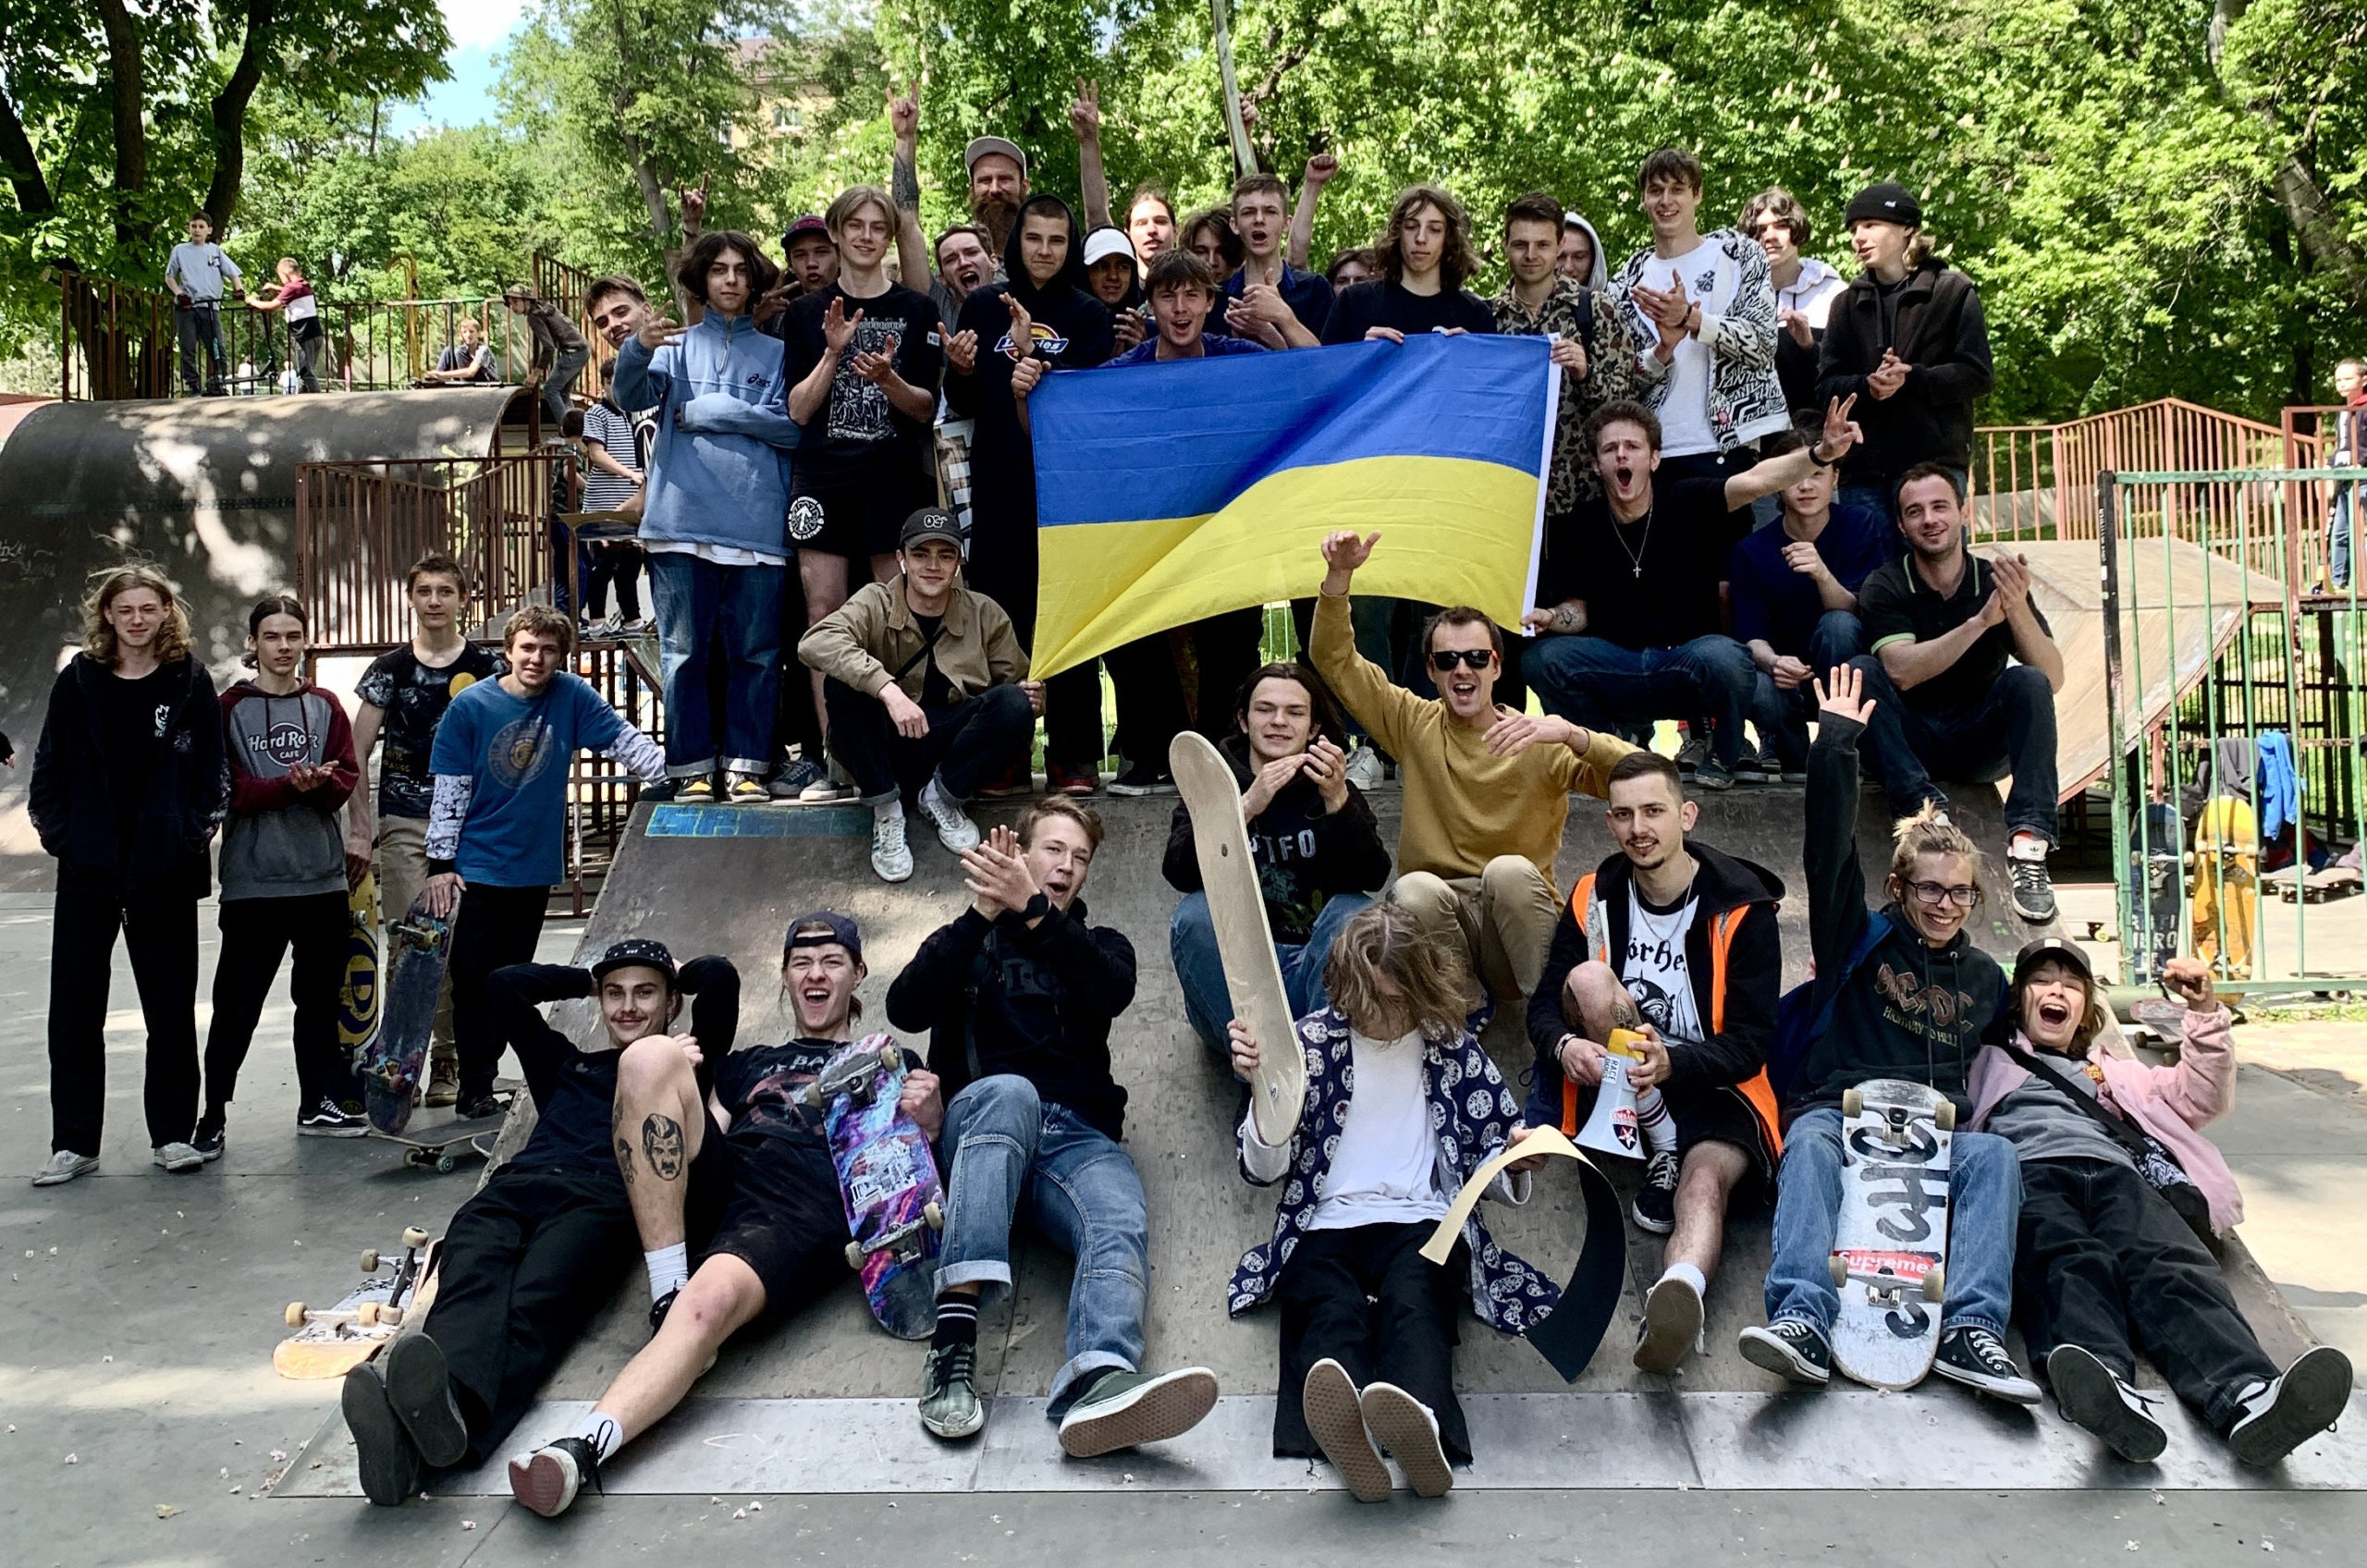 POST_Group photo at Lviv contest 15.05.2022